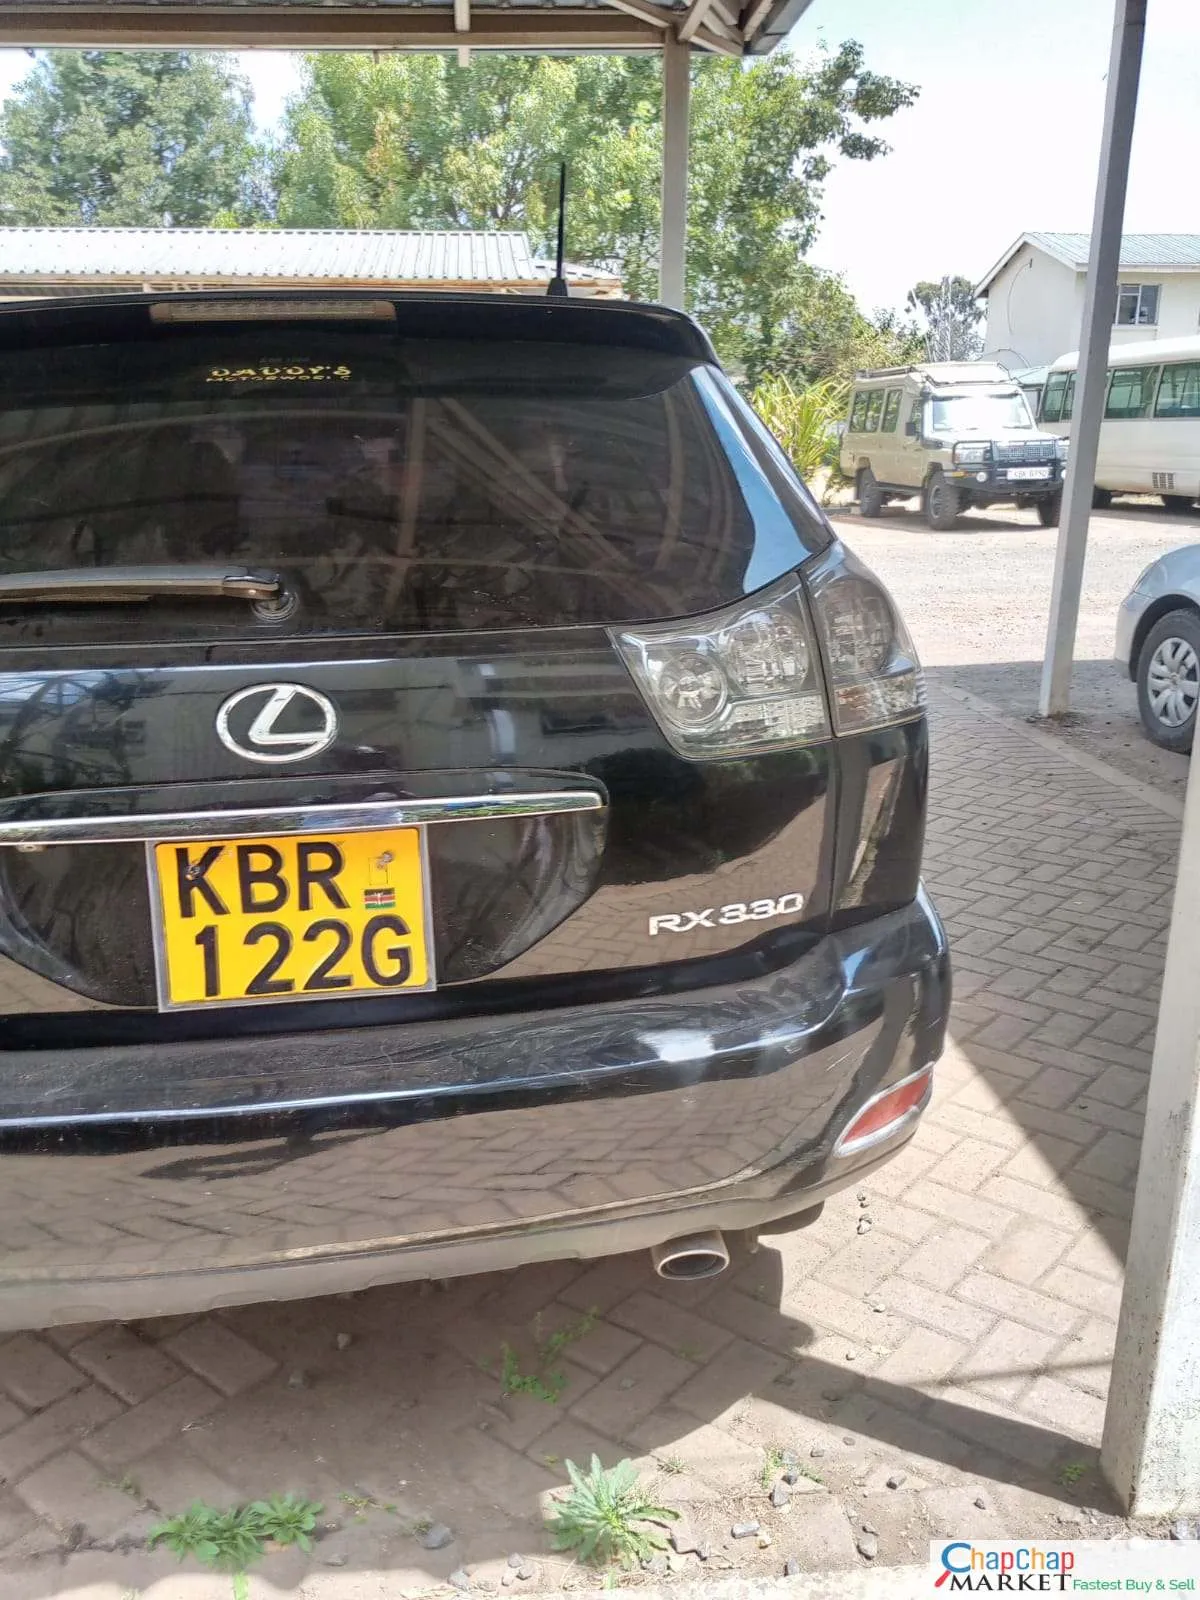 Toyota Harrier kenya QUICK SALE You Pay 30% Deposit Trade in OK harrier for sale in kenya hire purchase installments EXCLUSIVE (SOLD)